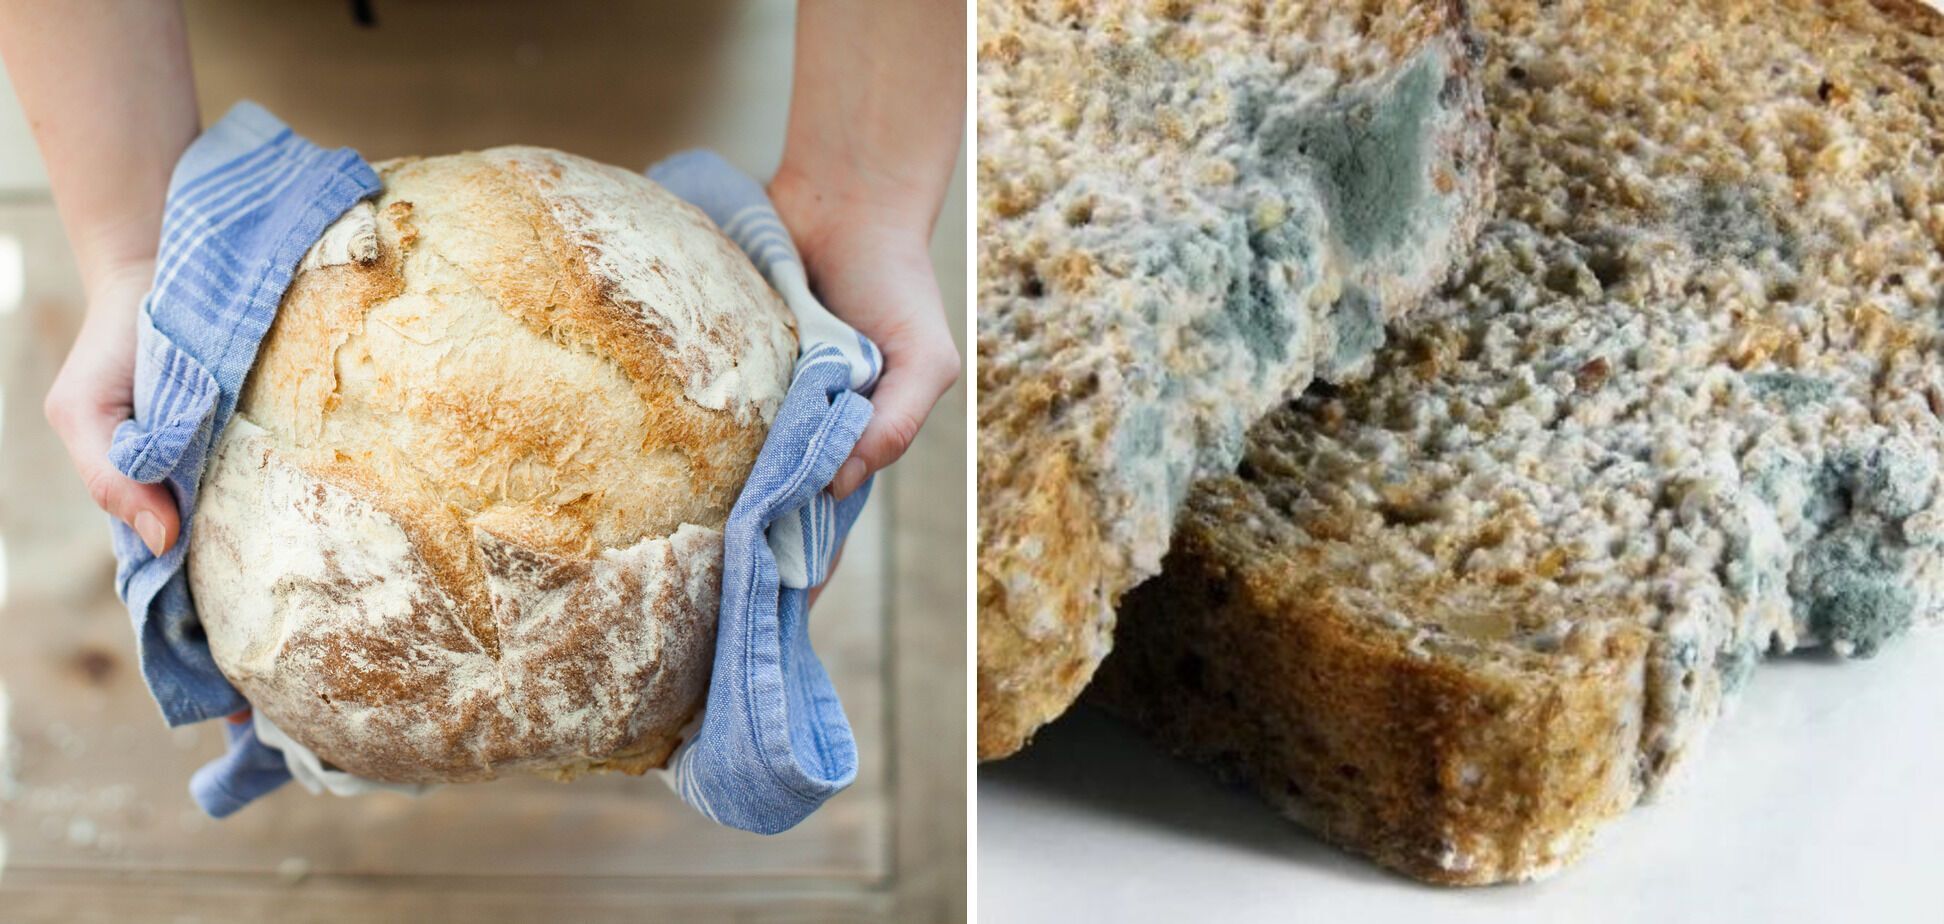 How to avoid mold on bread